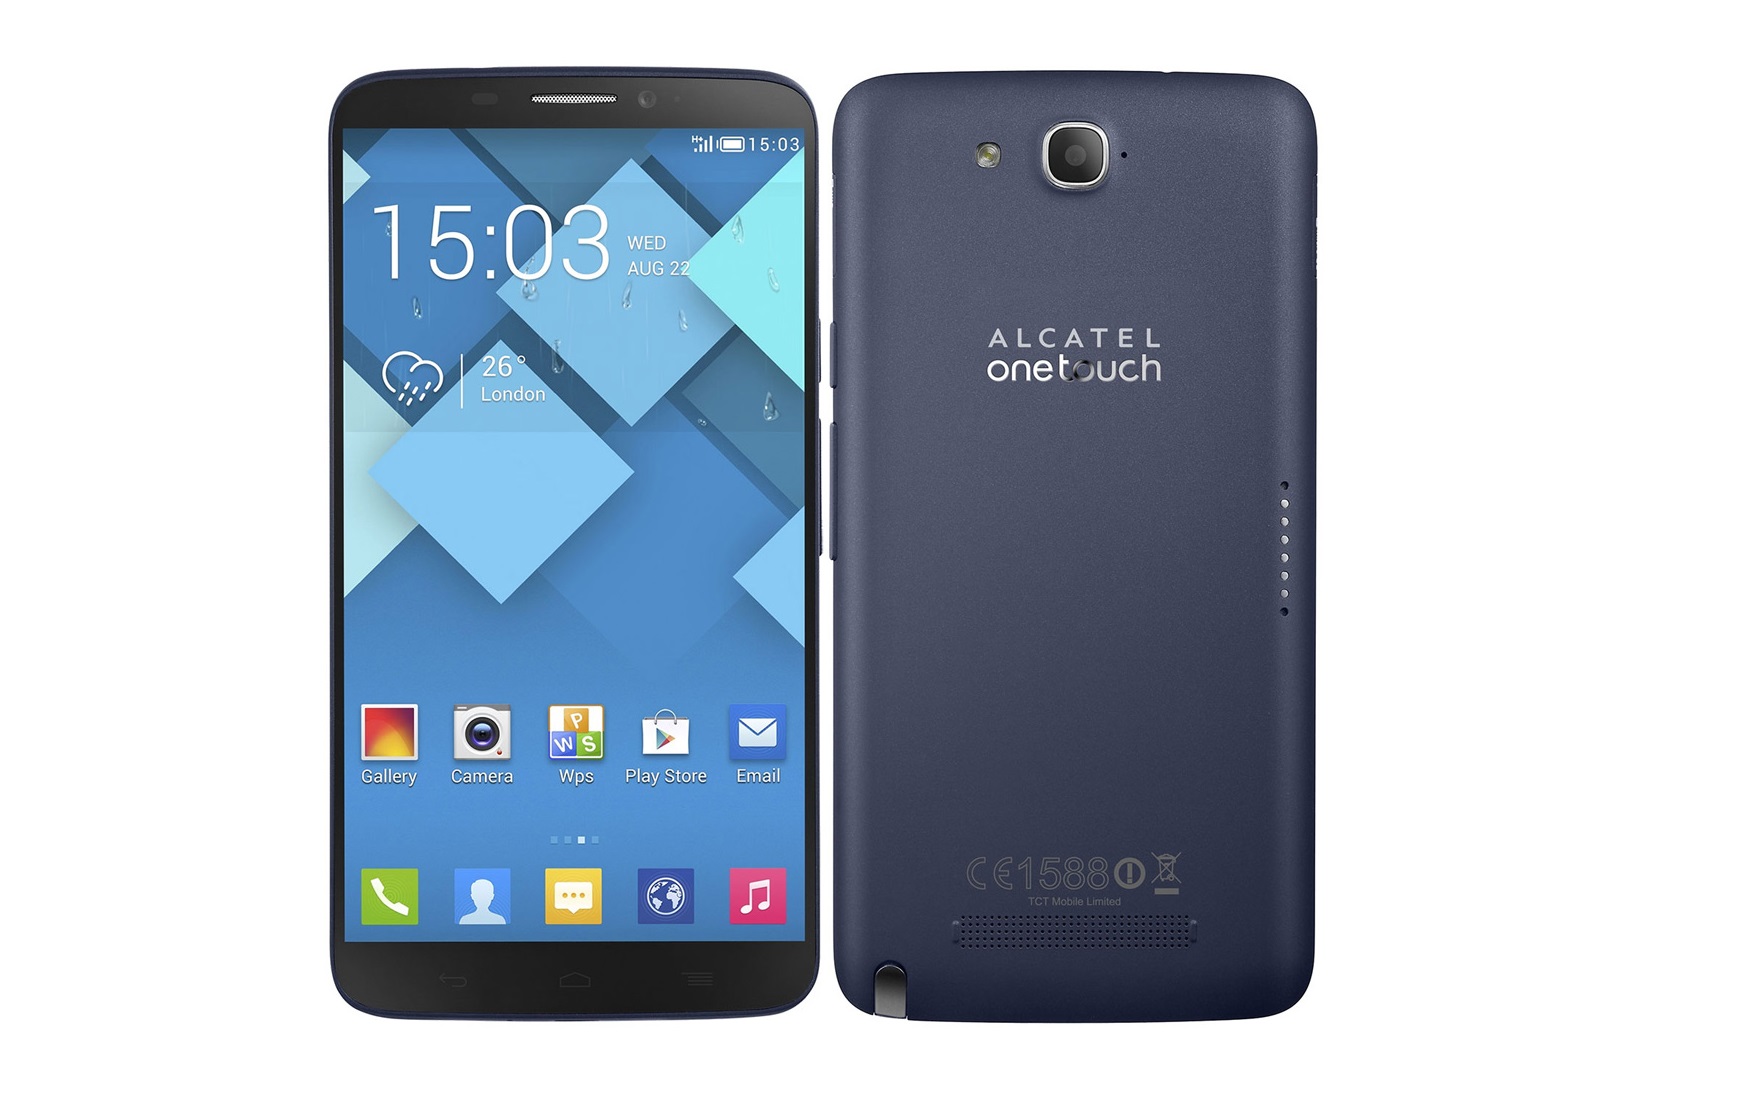 How to boot into safe mode on Alcatel Hero